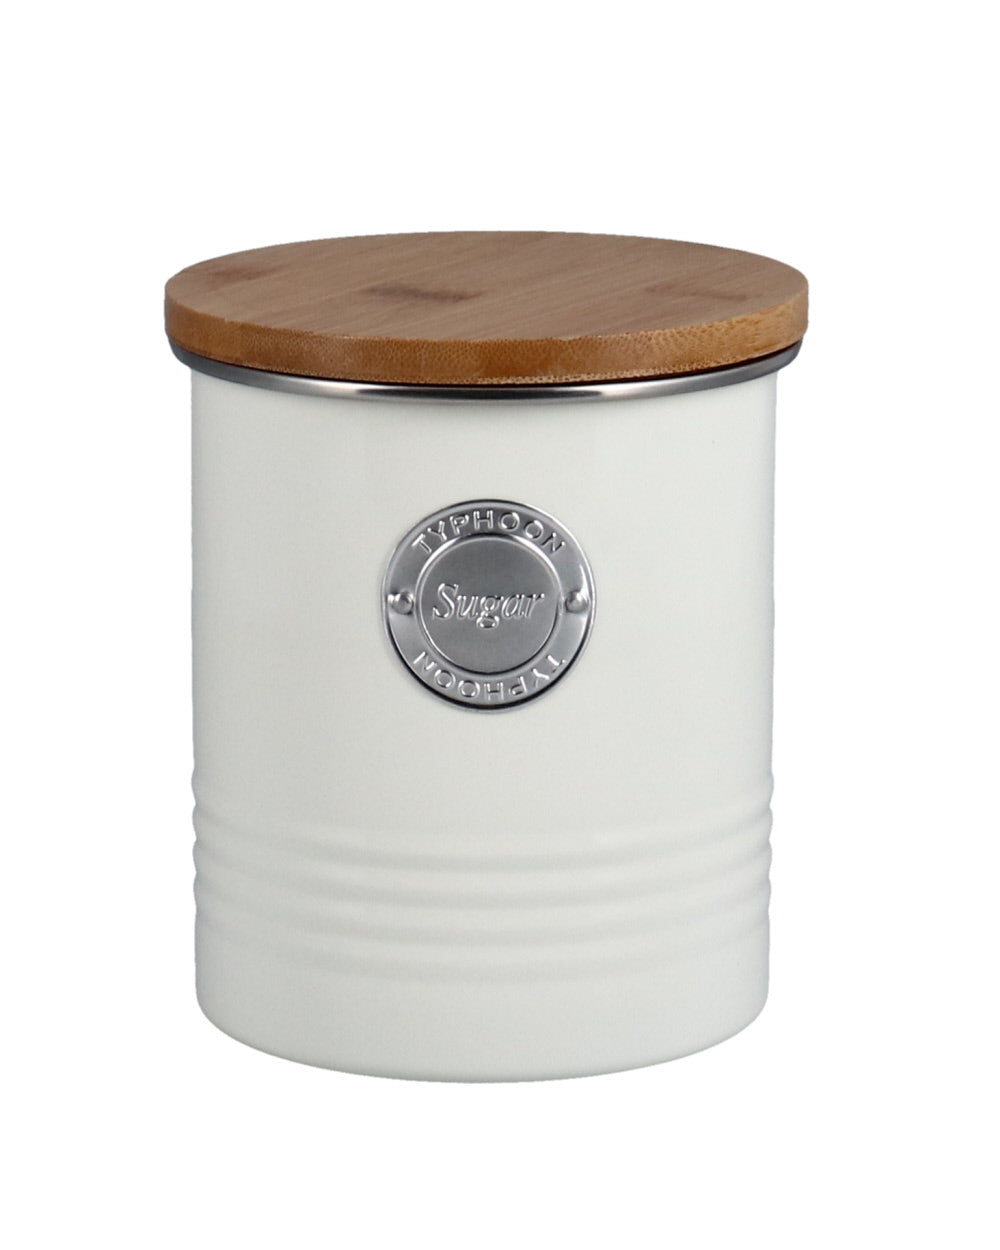 Sugar Containers, For Food Storage, Size: 110 X 110 X 135mm